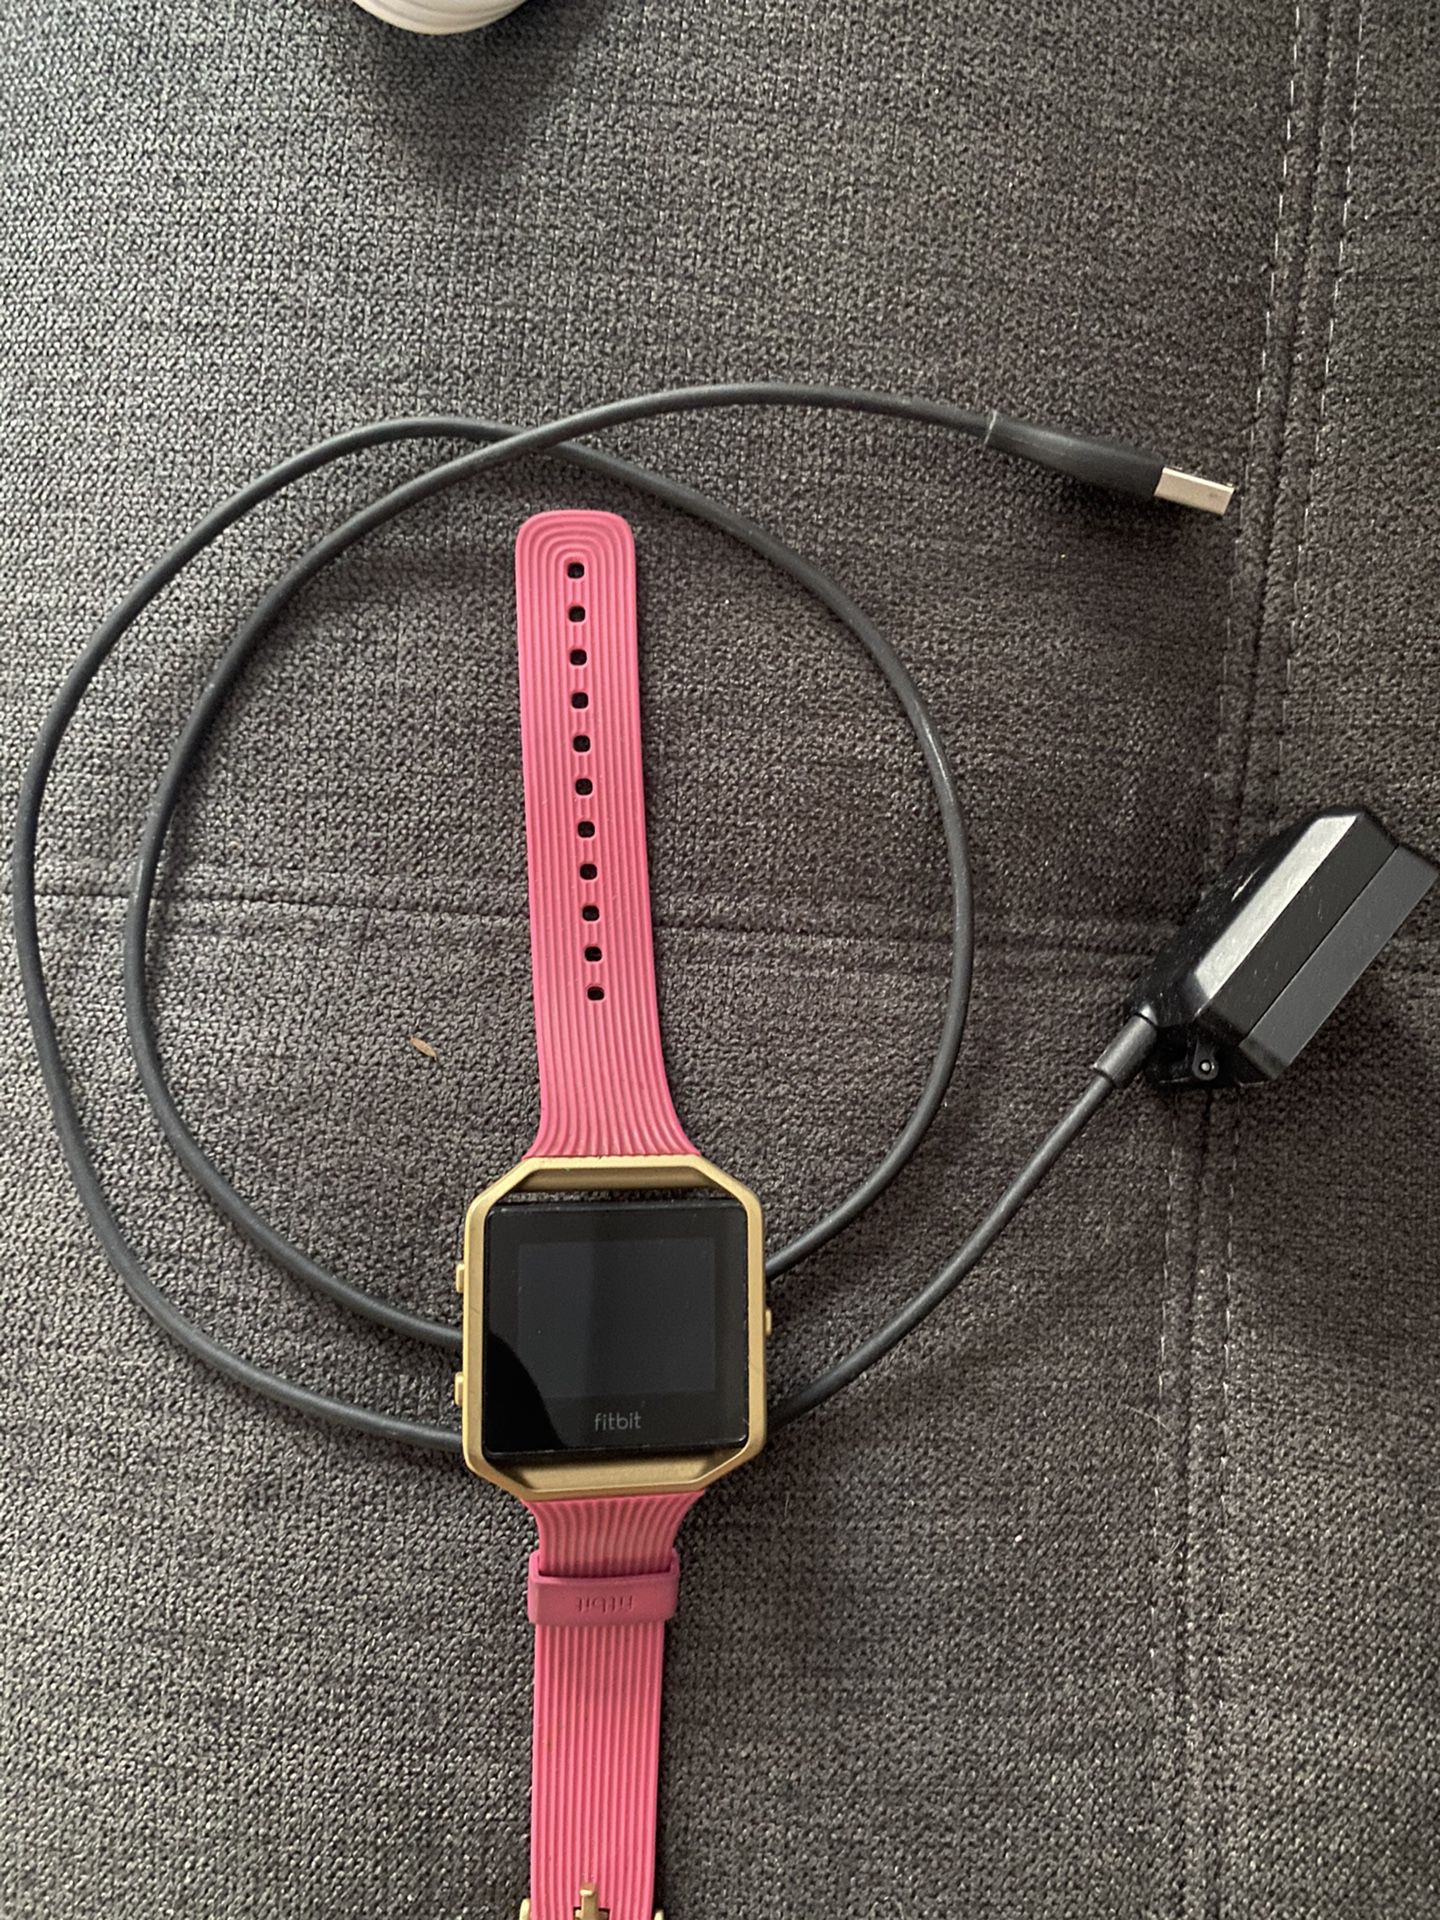 Fitbit blaze with charger